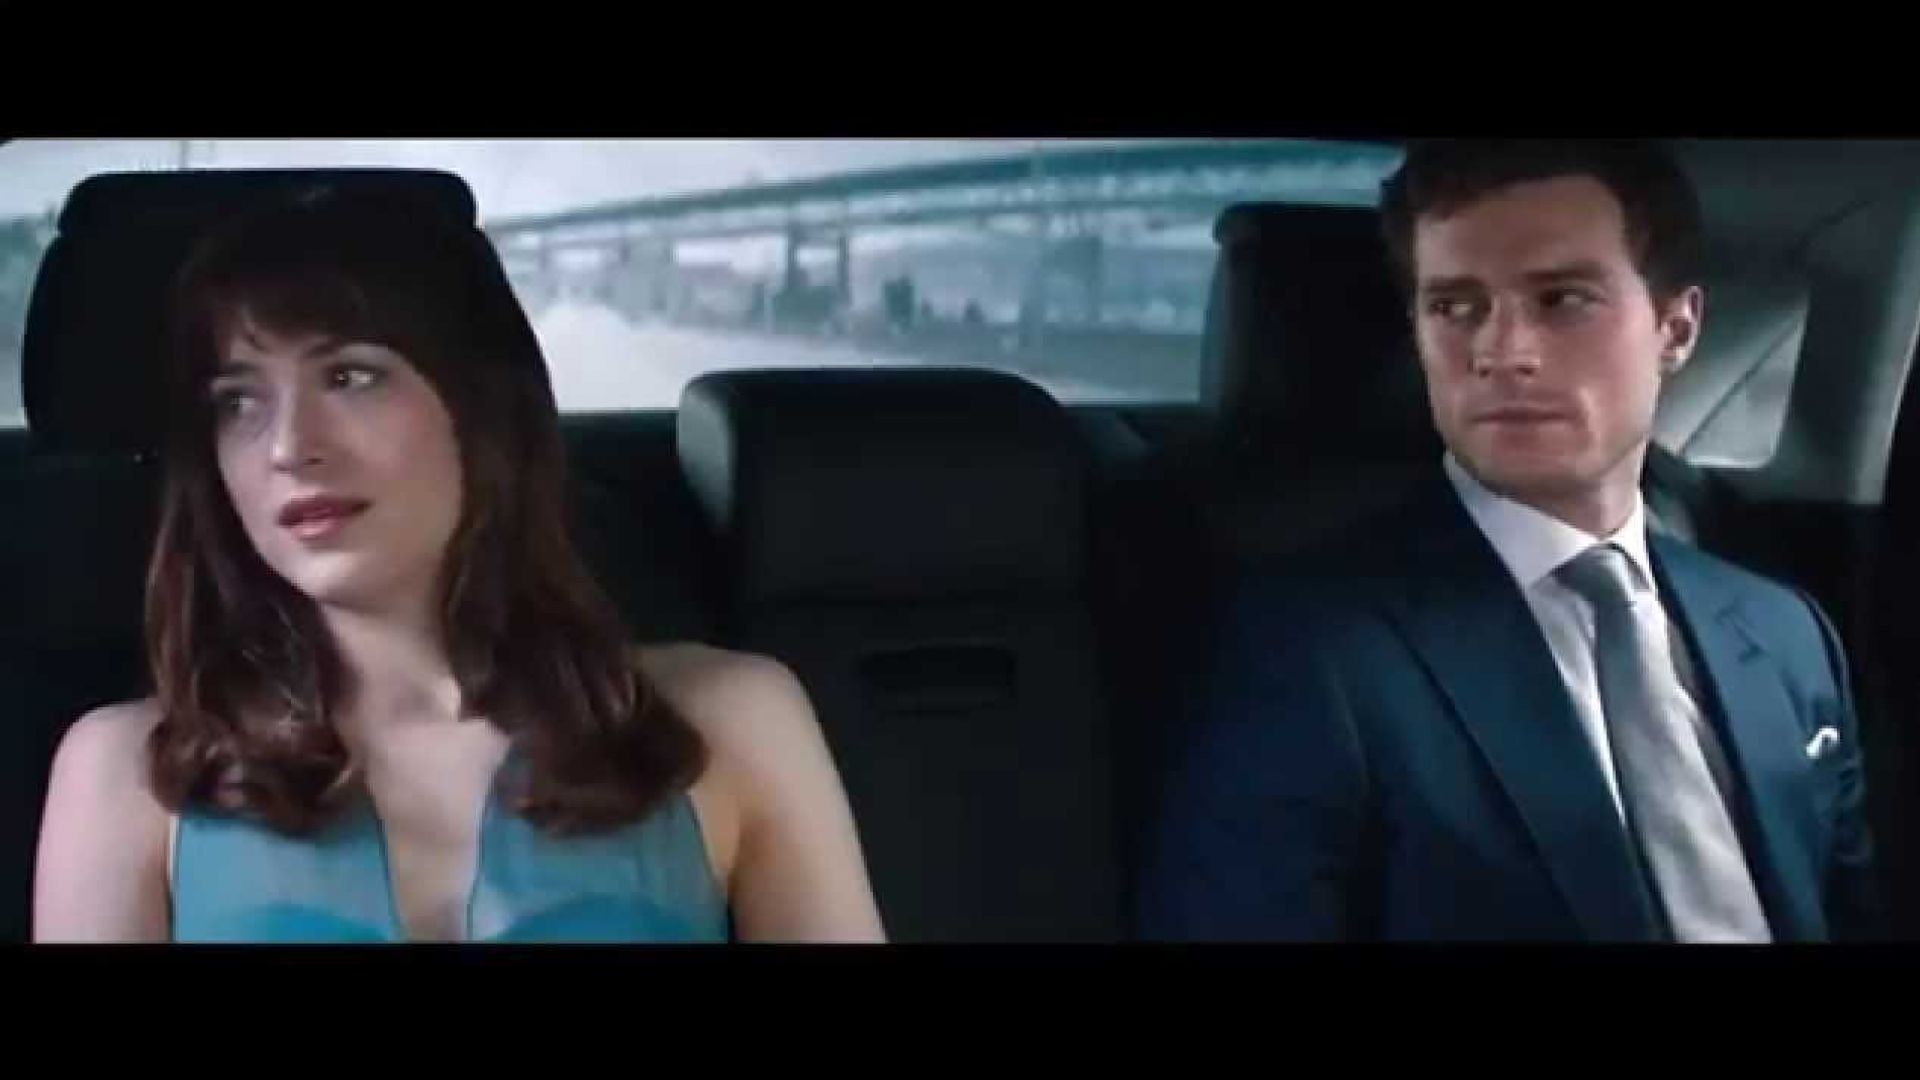 New TV Spot for &#039;Fifty Shades of Grey&#039;